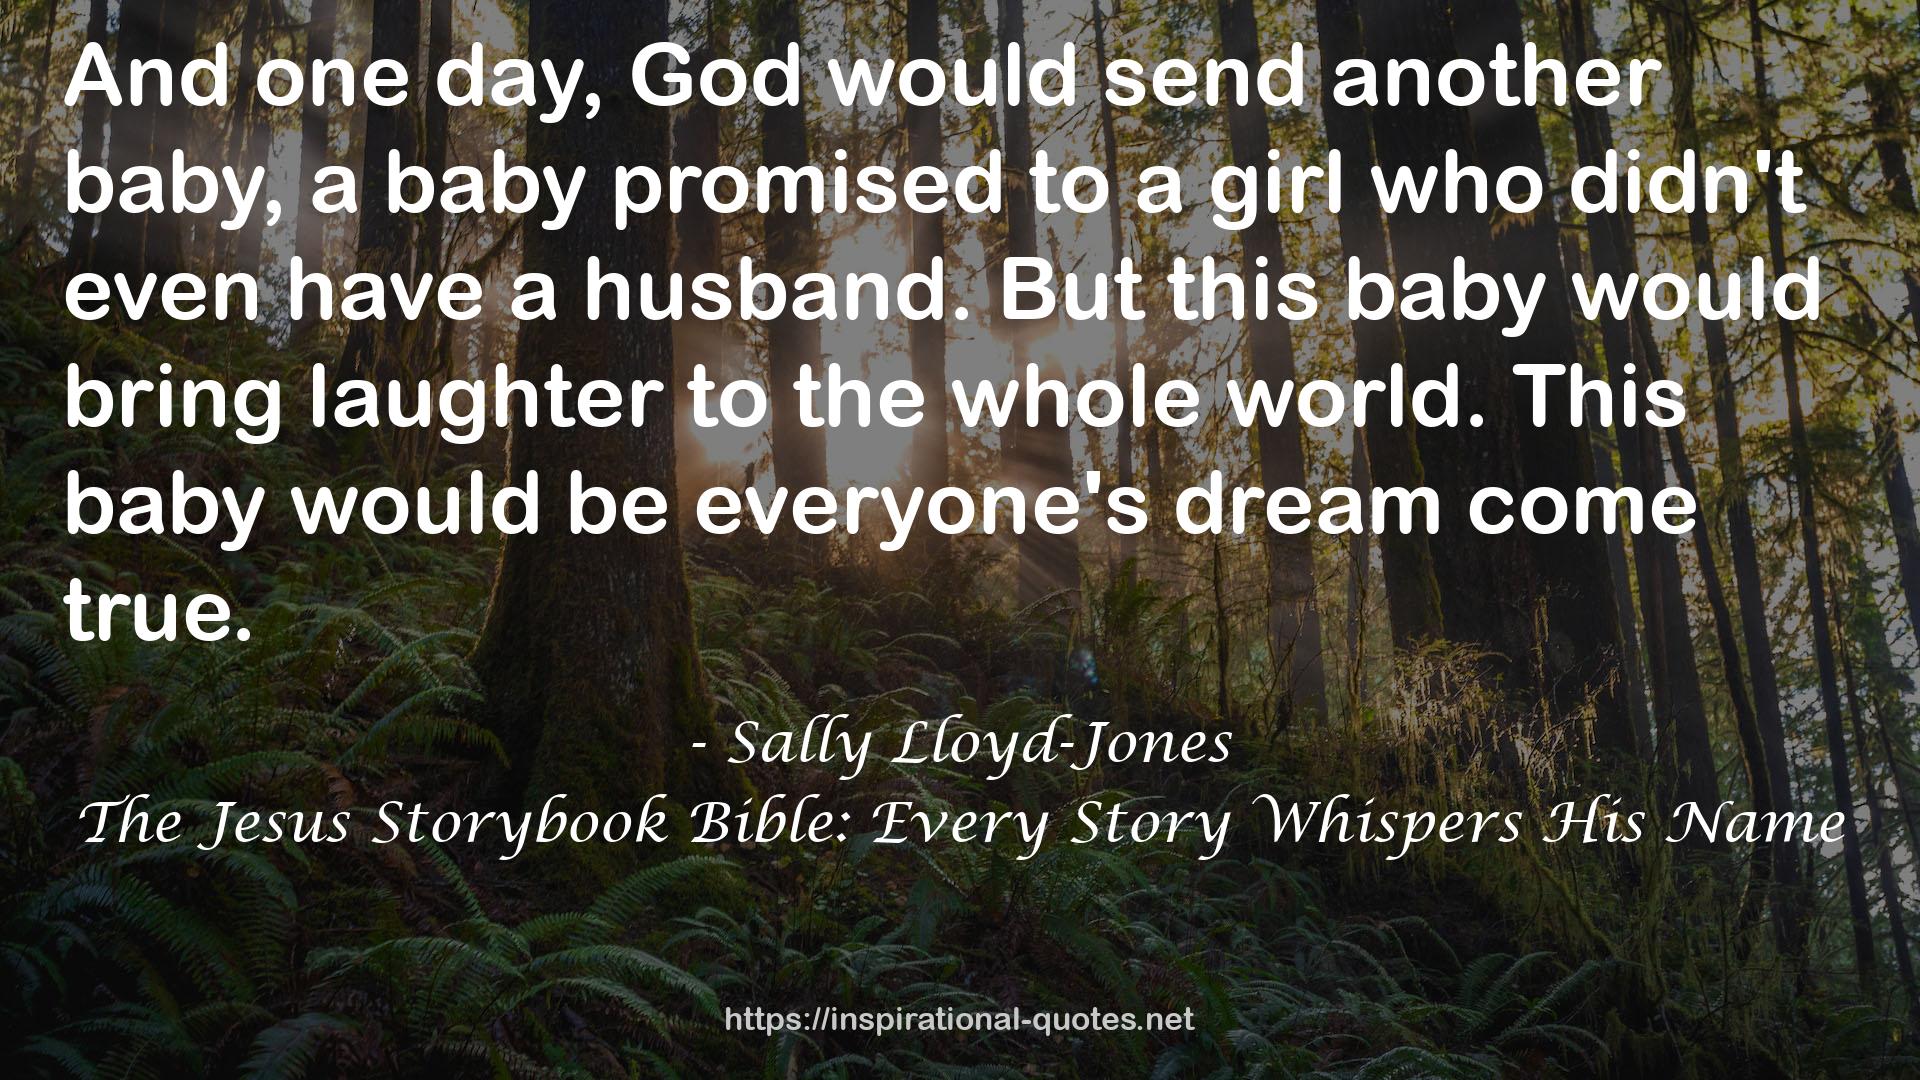 The Jesus Storybook Bible: Every Story Whispers His Name QUOTES